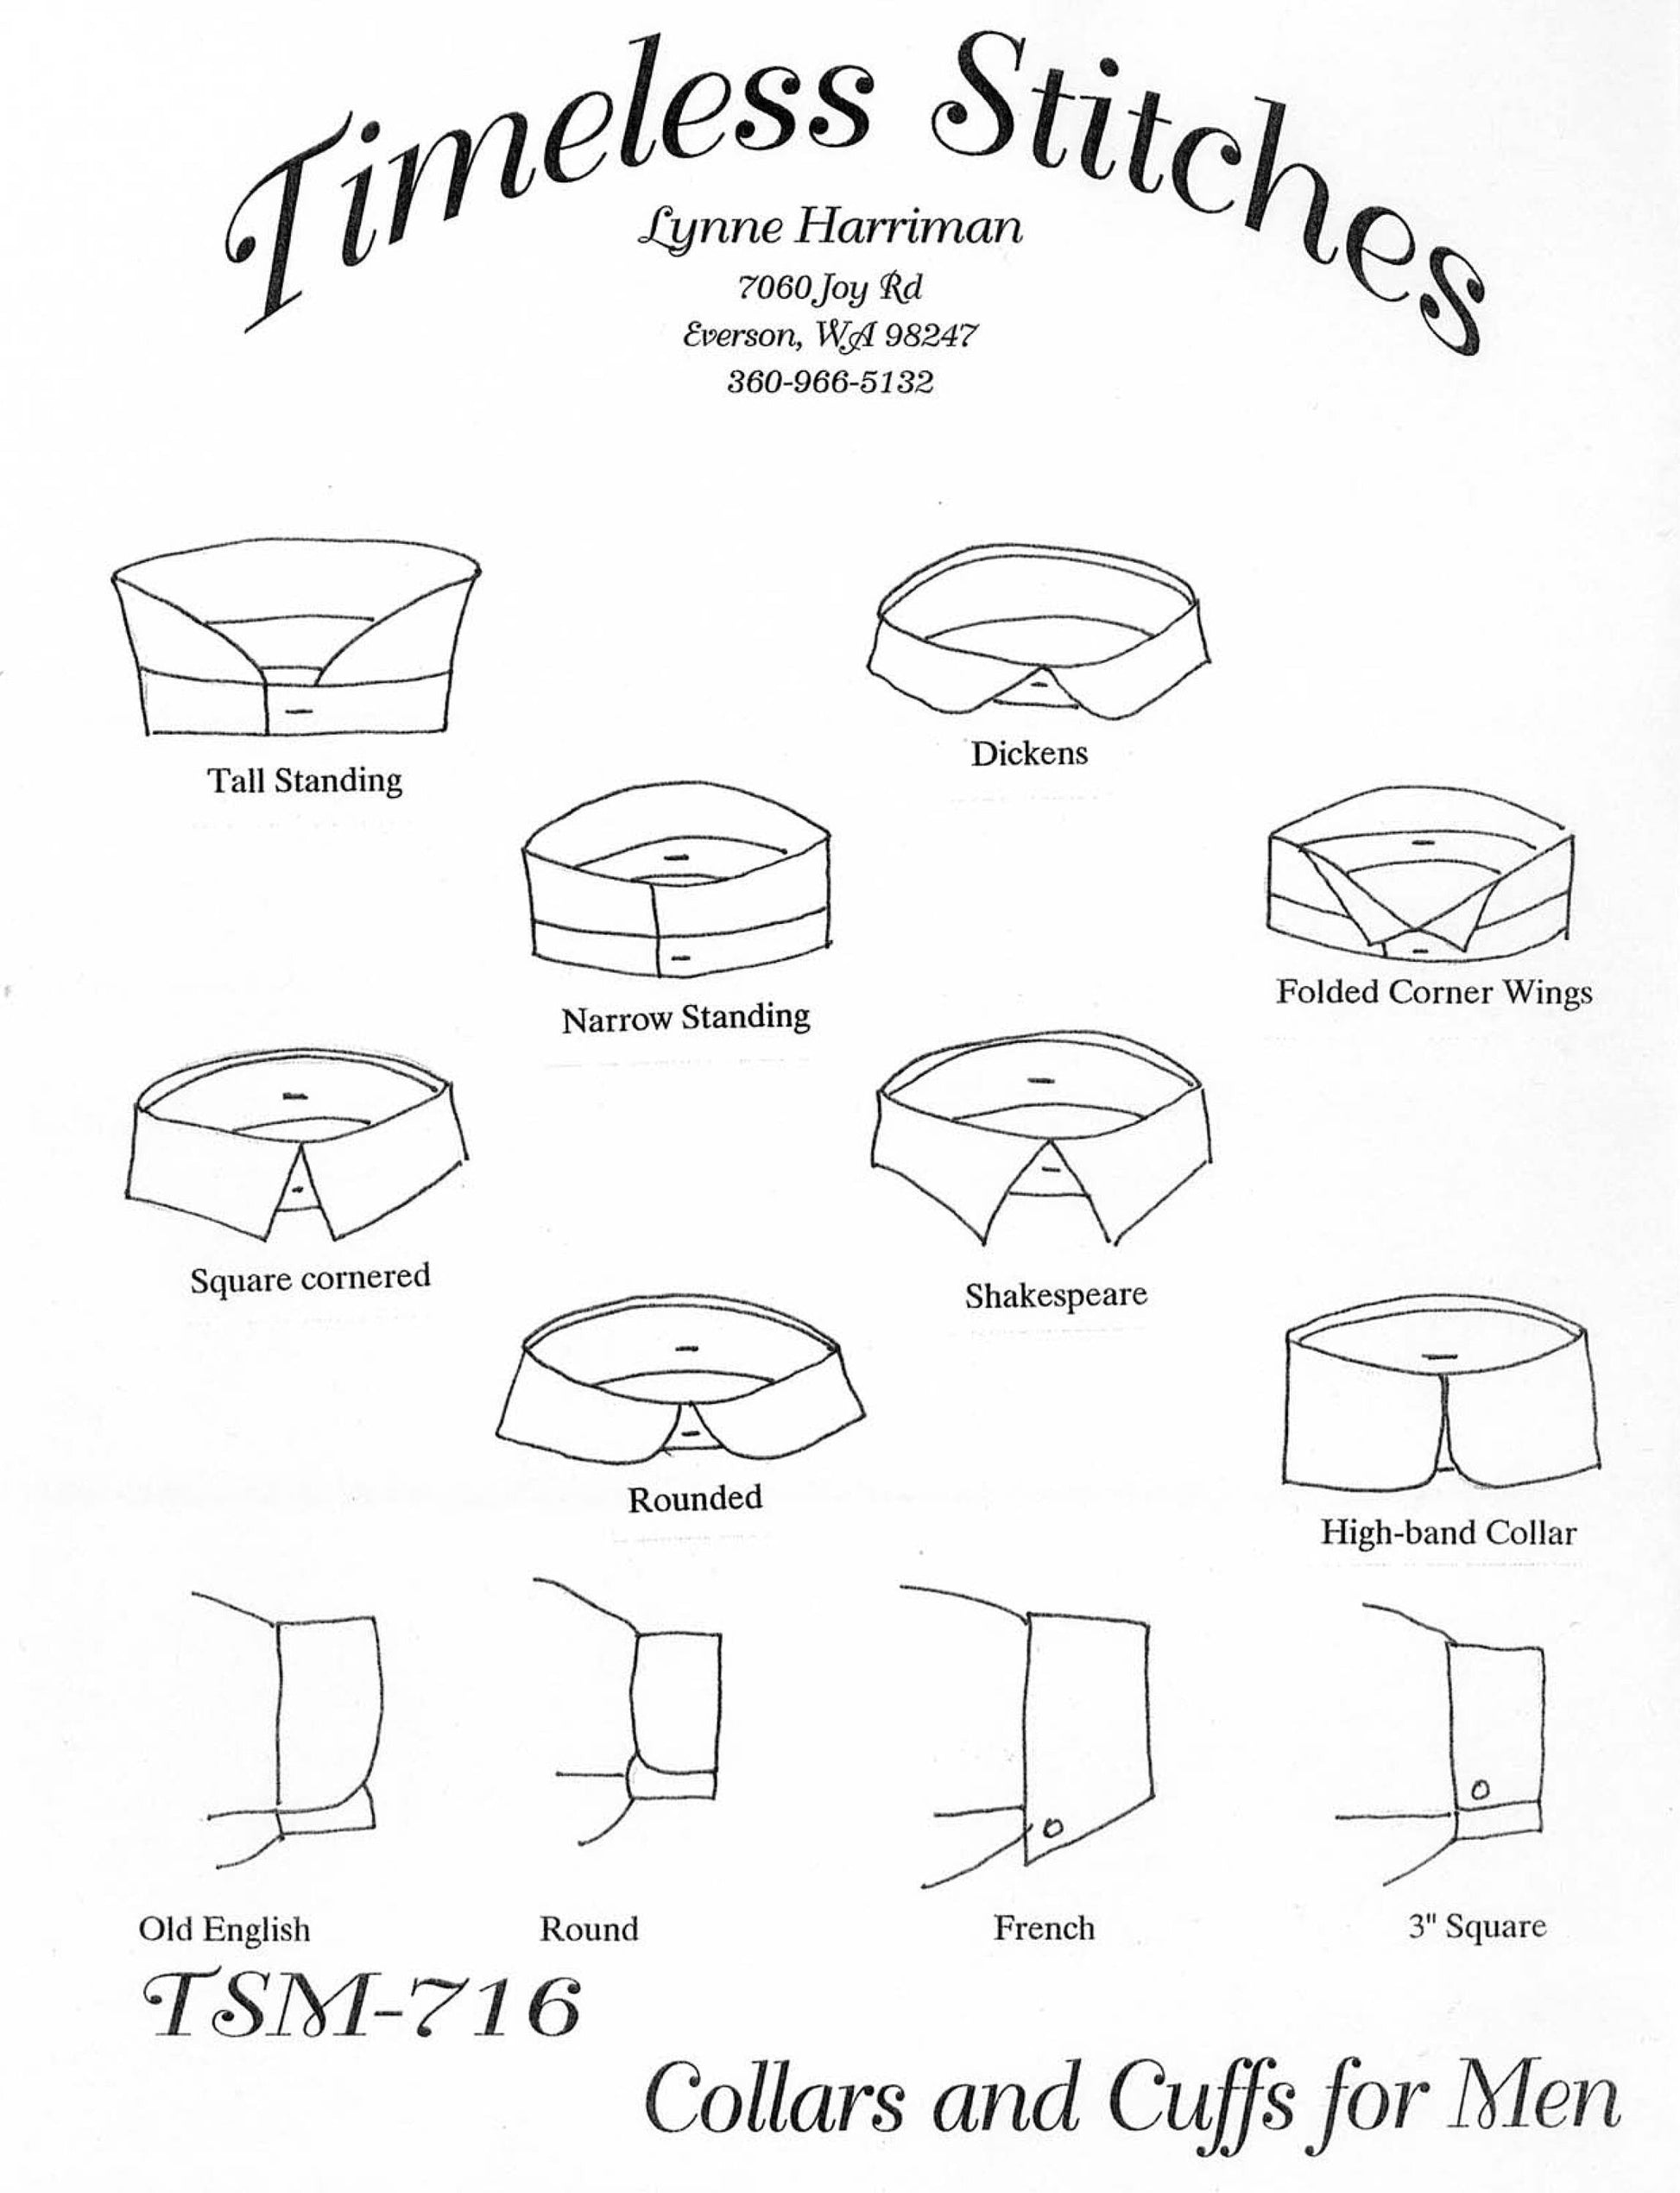 Collars and Cuffs for Men's Shirts/ 19th Century Civilian Collars and Cuffs Pattern Timeless Stitches Sewing Pattern TSM-716